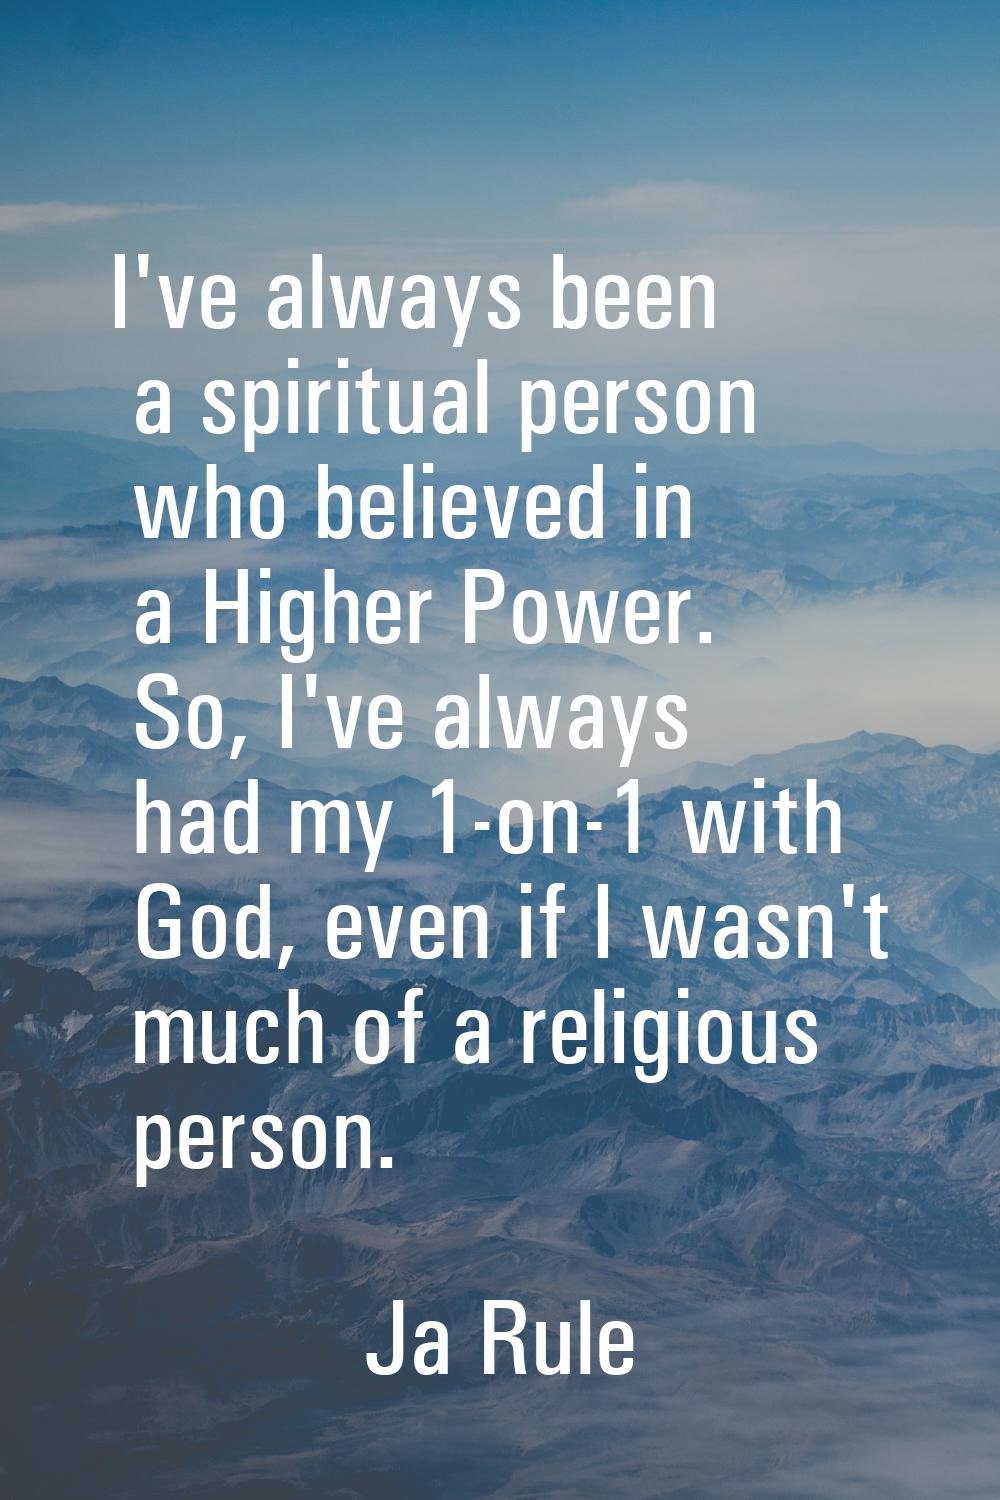 I've always been a spiritual person who believed in a Higher Power. So, I've always had my 1-on-1 w